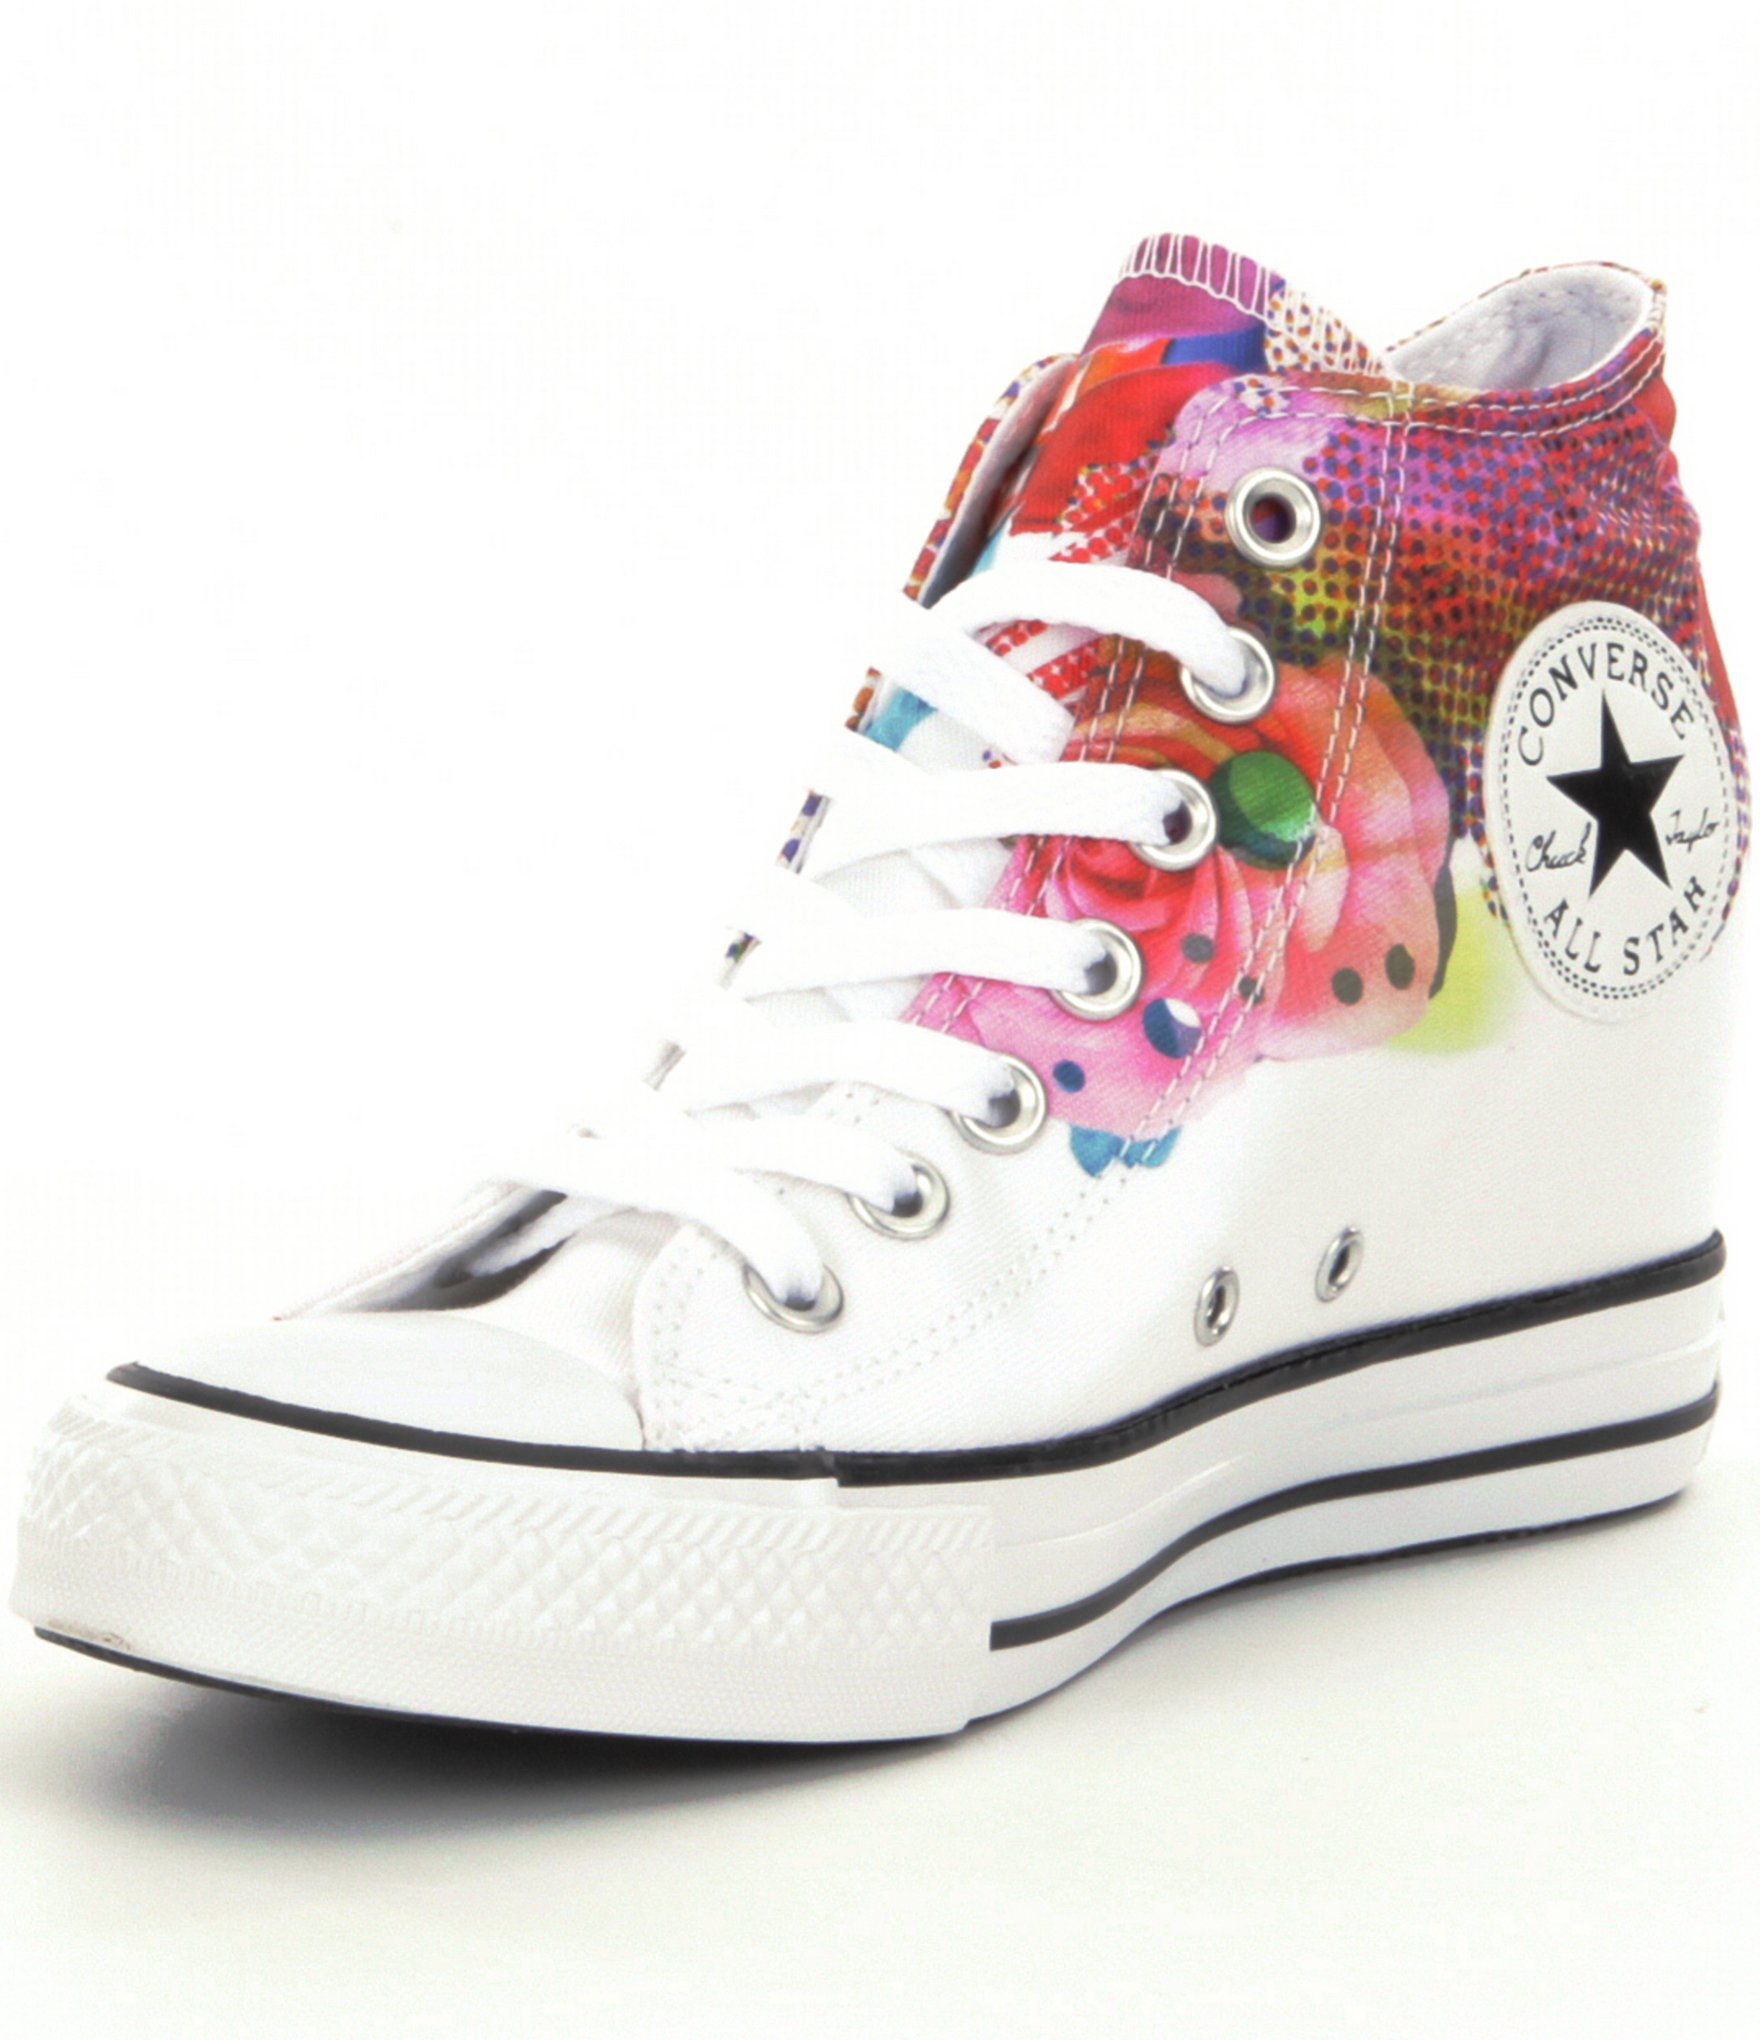 36  Converse all star wedge shoes Combine with Best Outfit